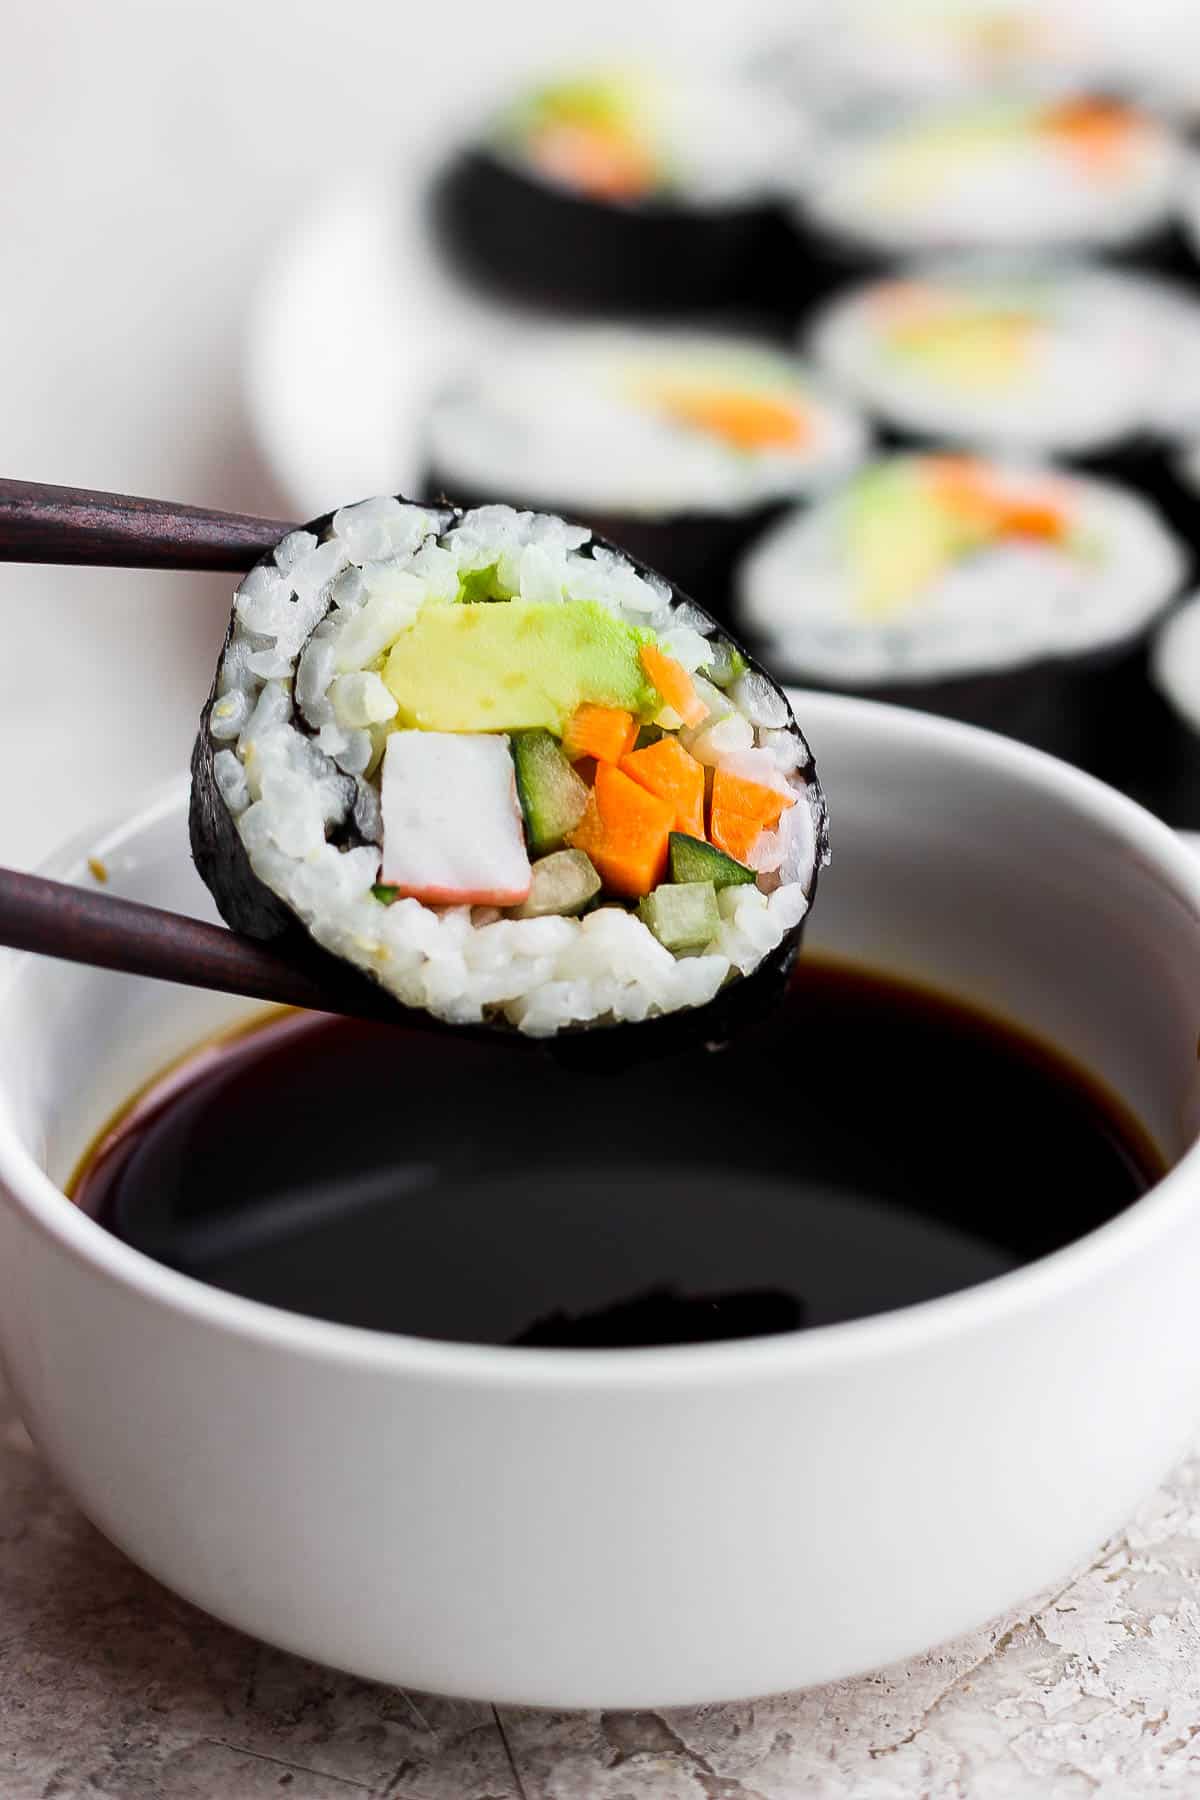 Chopsticks holding a piece of a California roll over a bowl of soy sauce.